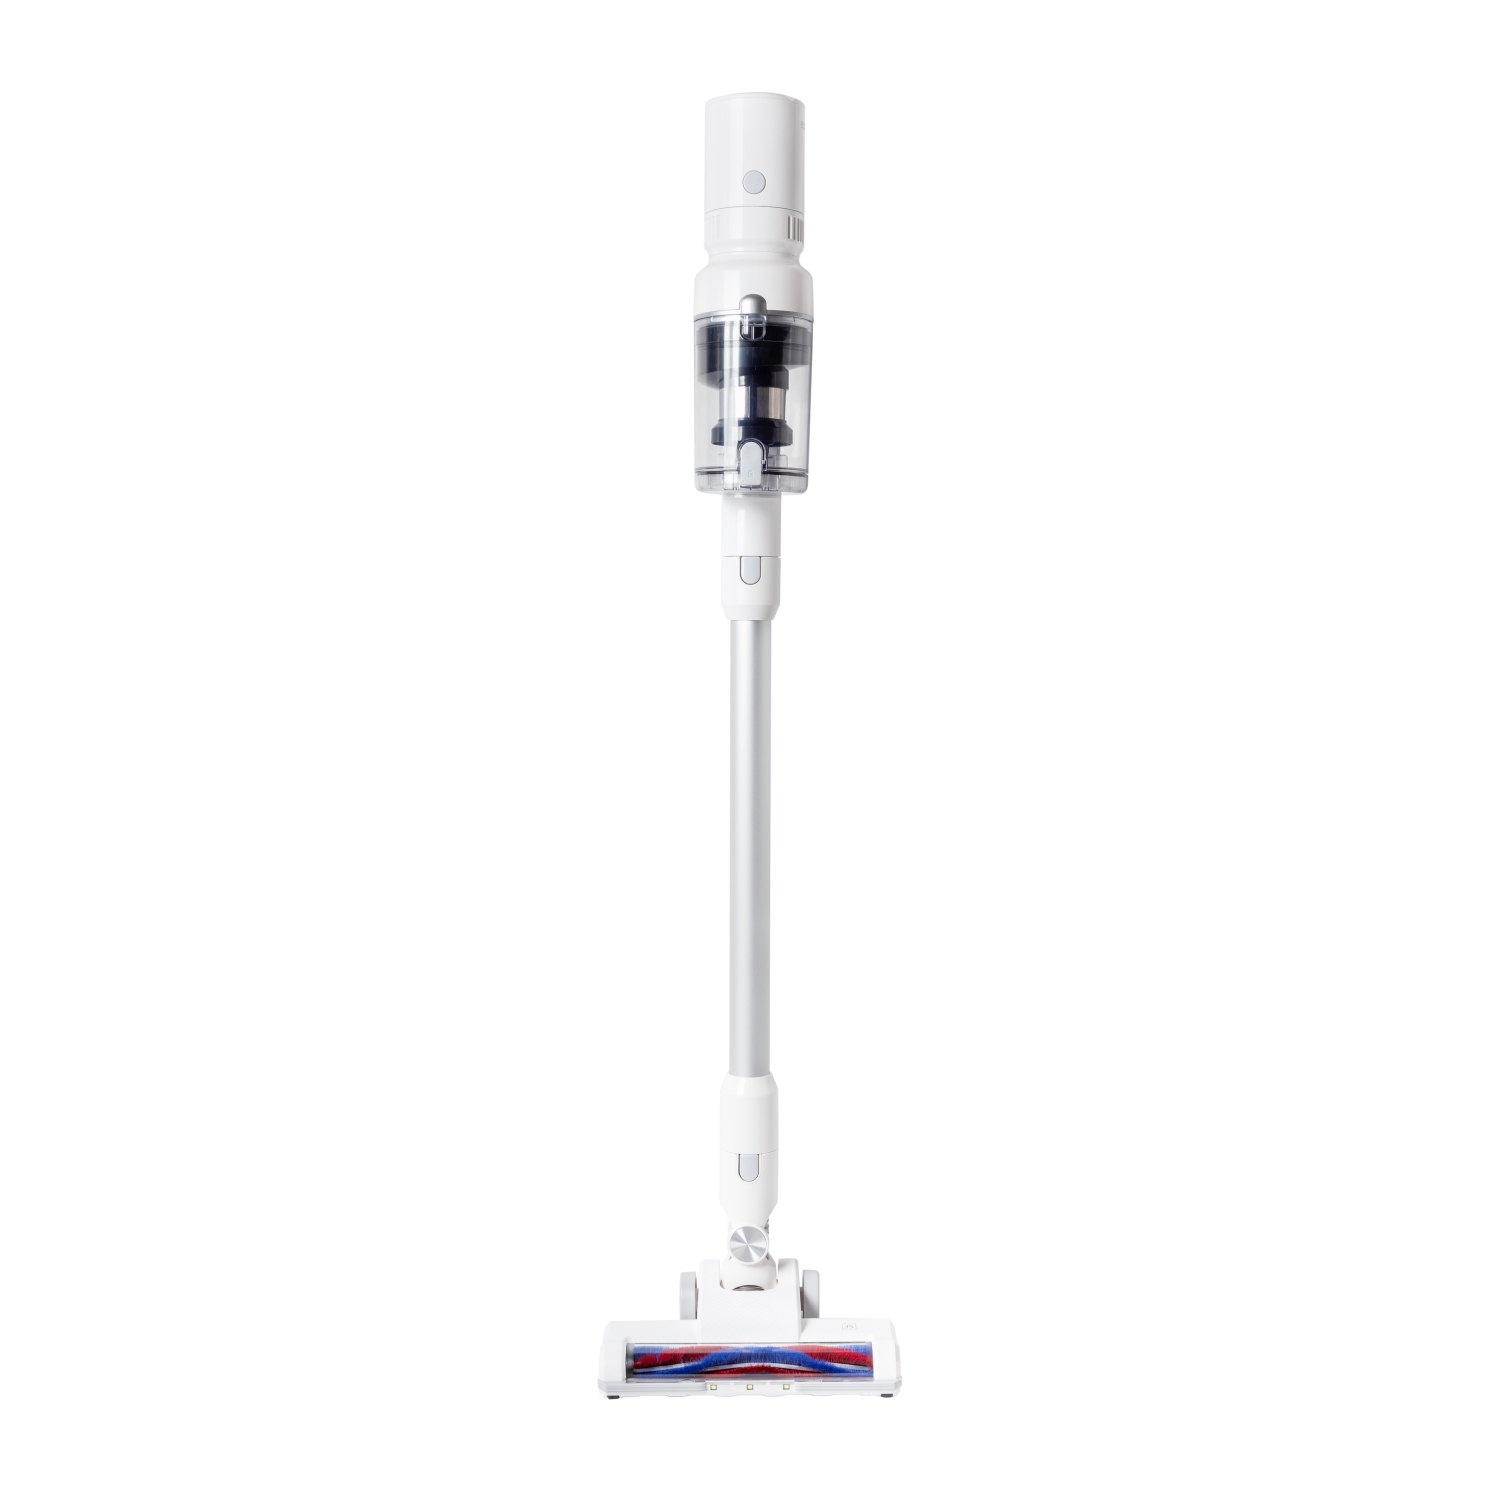 JS T1 Swift – 3-in-1 Cordless Stick Vacuum – Lightest in class –350W Powerful cyclonic filtration + SS HEPA filter - Ultra long battery life